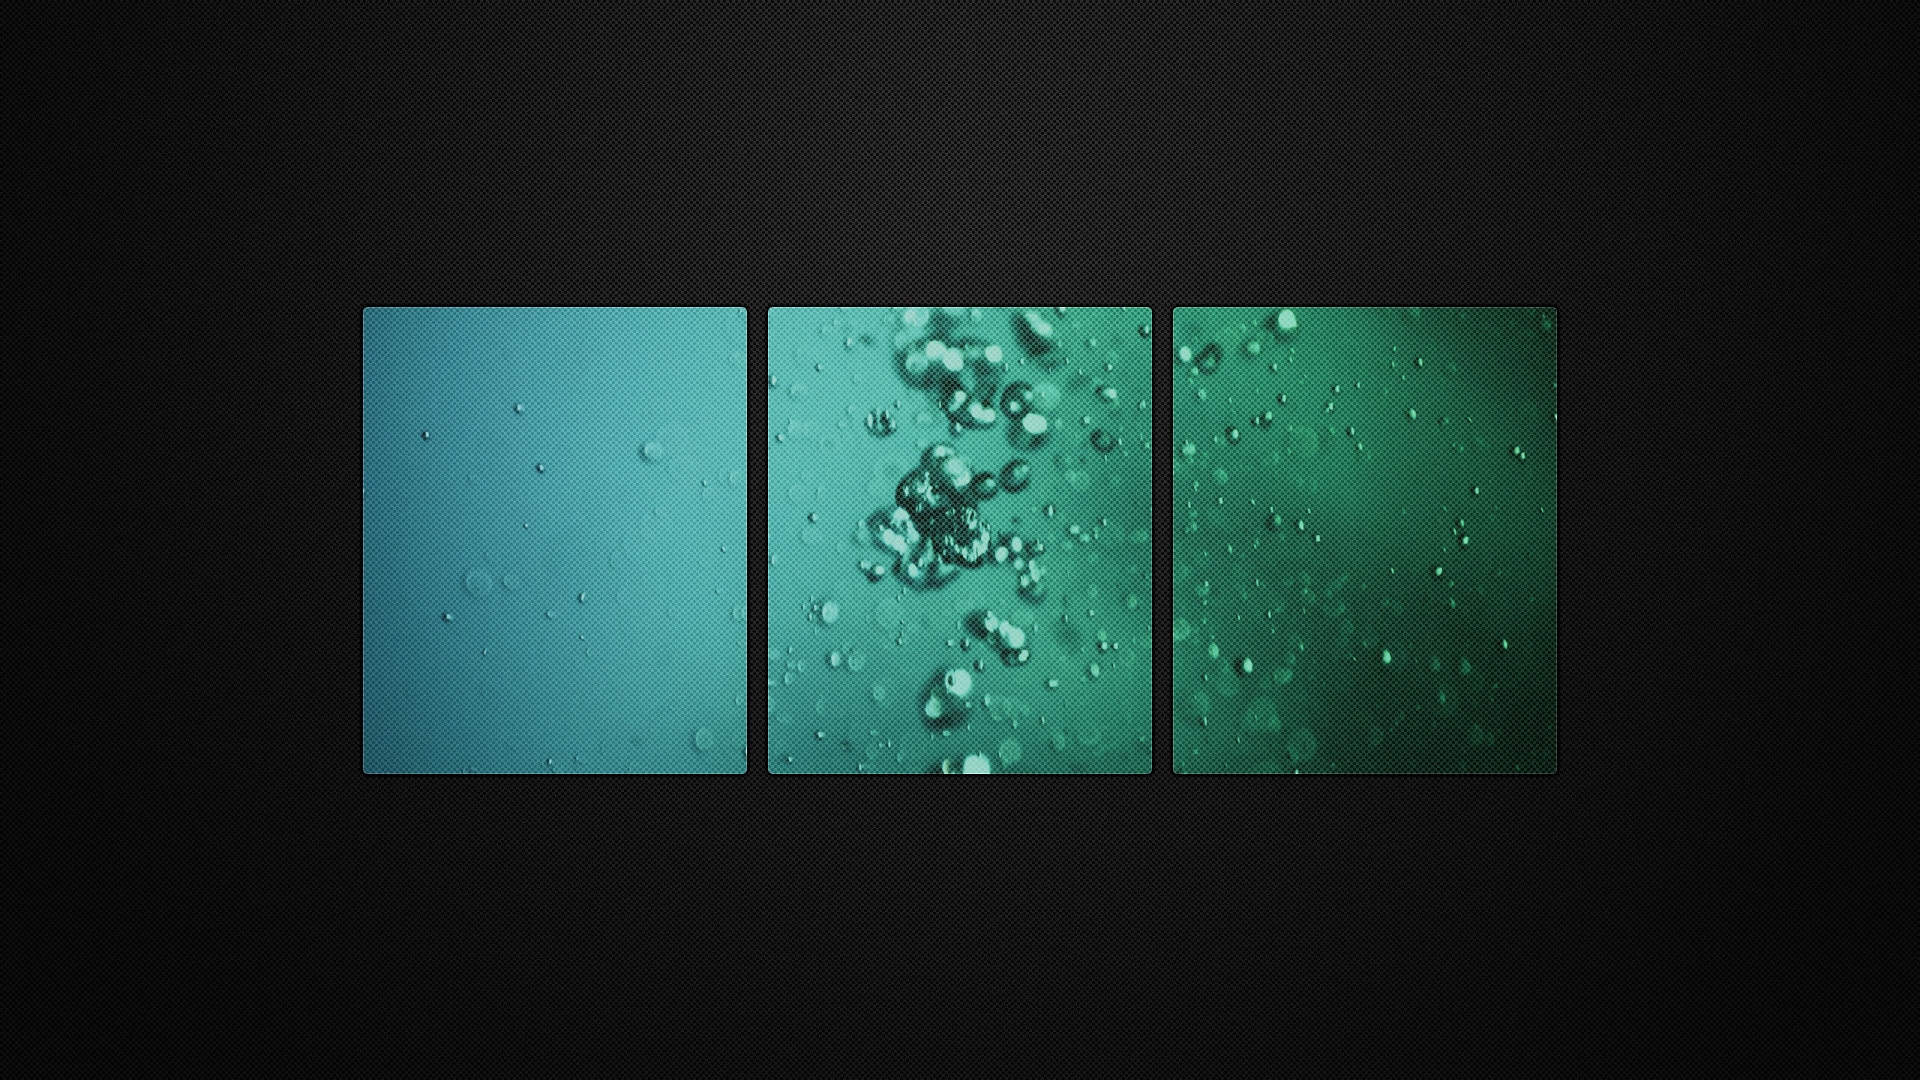 Cool Water Bubbles for 1920 x 1080 HDTV 1080p resolution